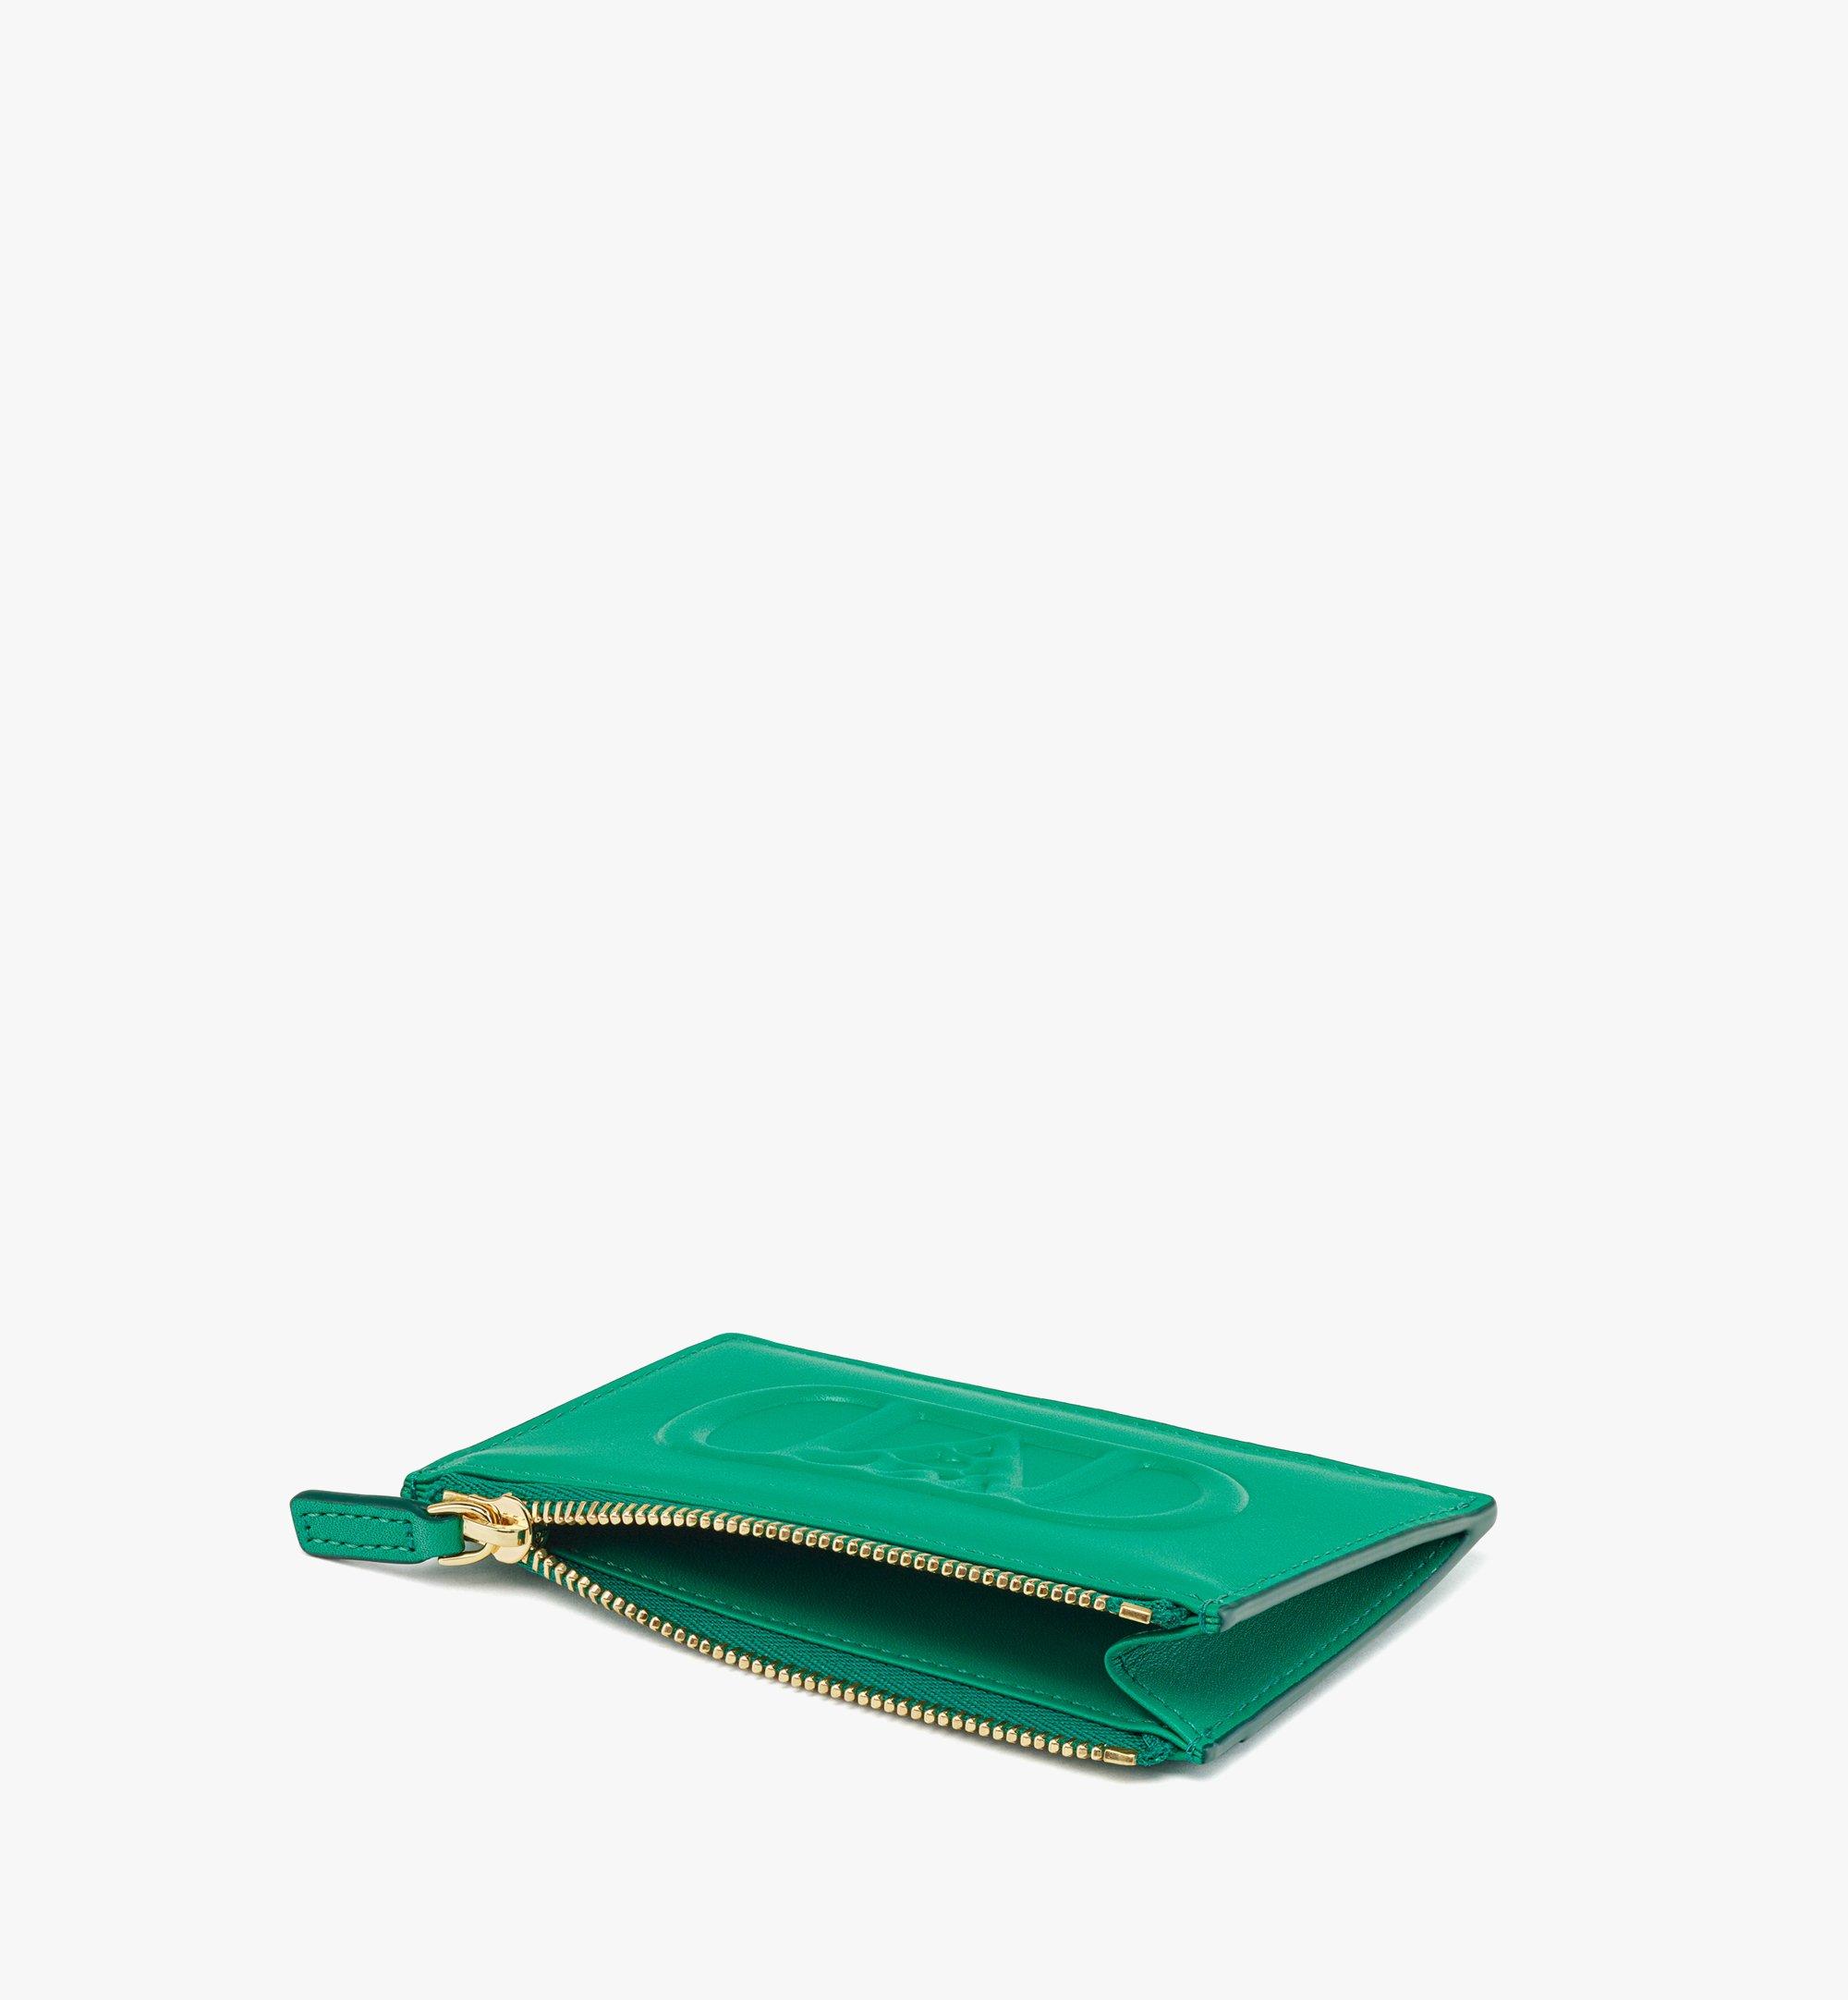 MCM Mode Travia Card Holder in Spanish Nappa Leather Green MYADSLD03J8001 Alternate View 1